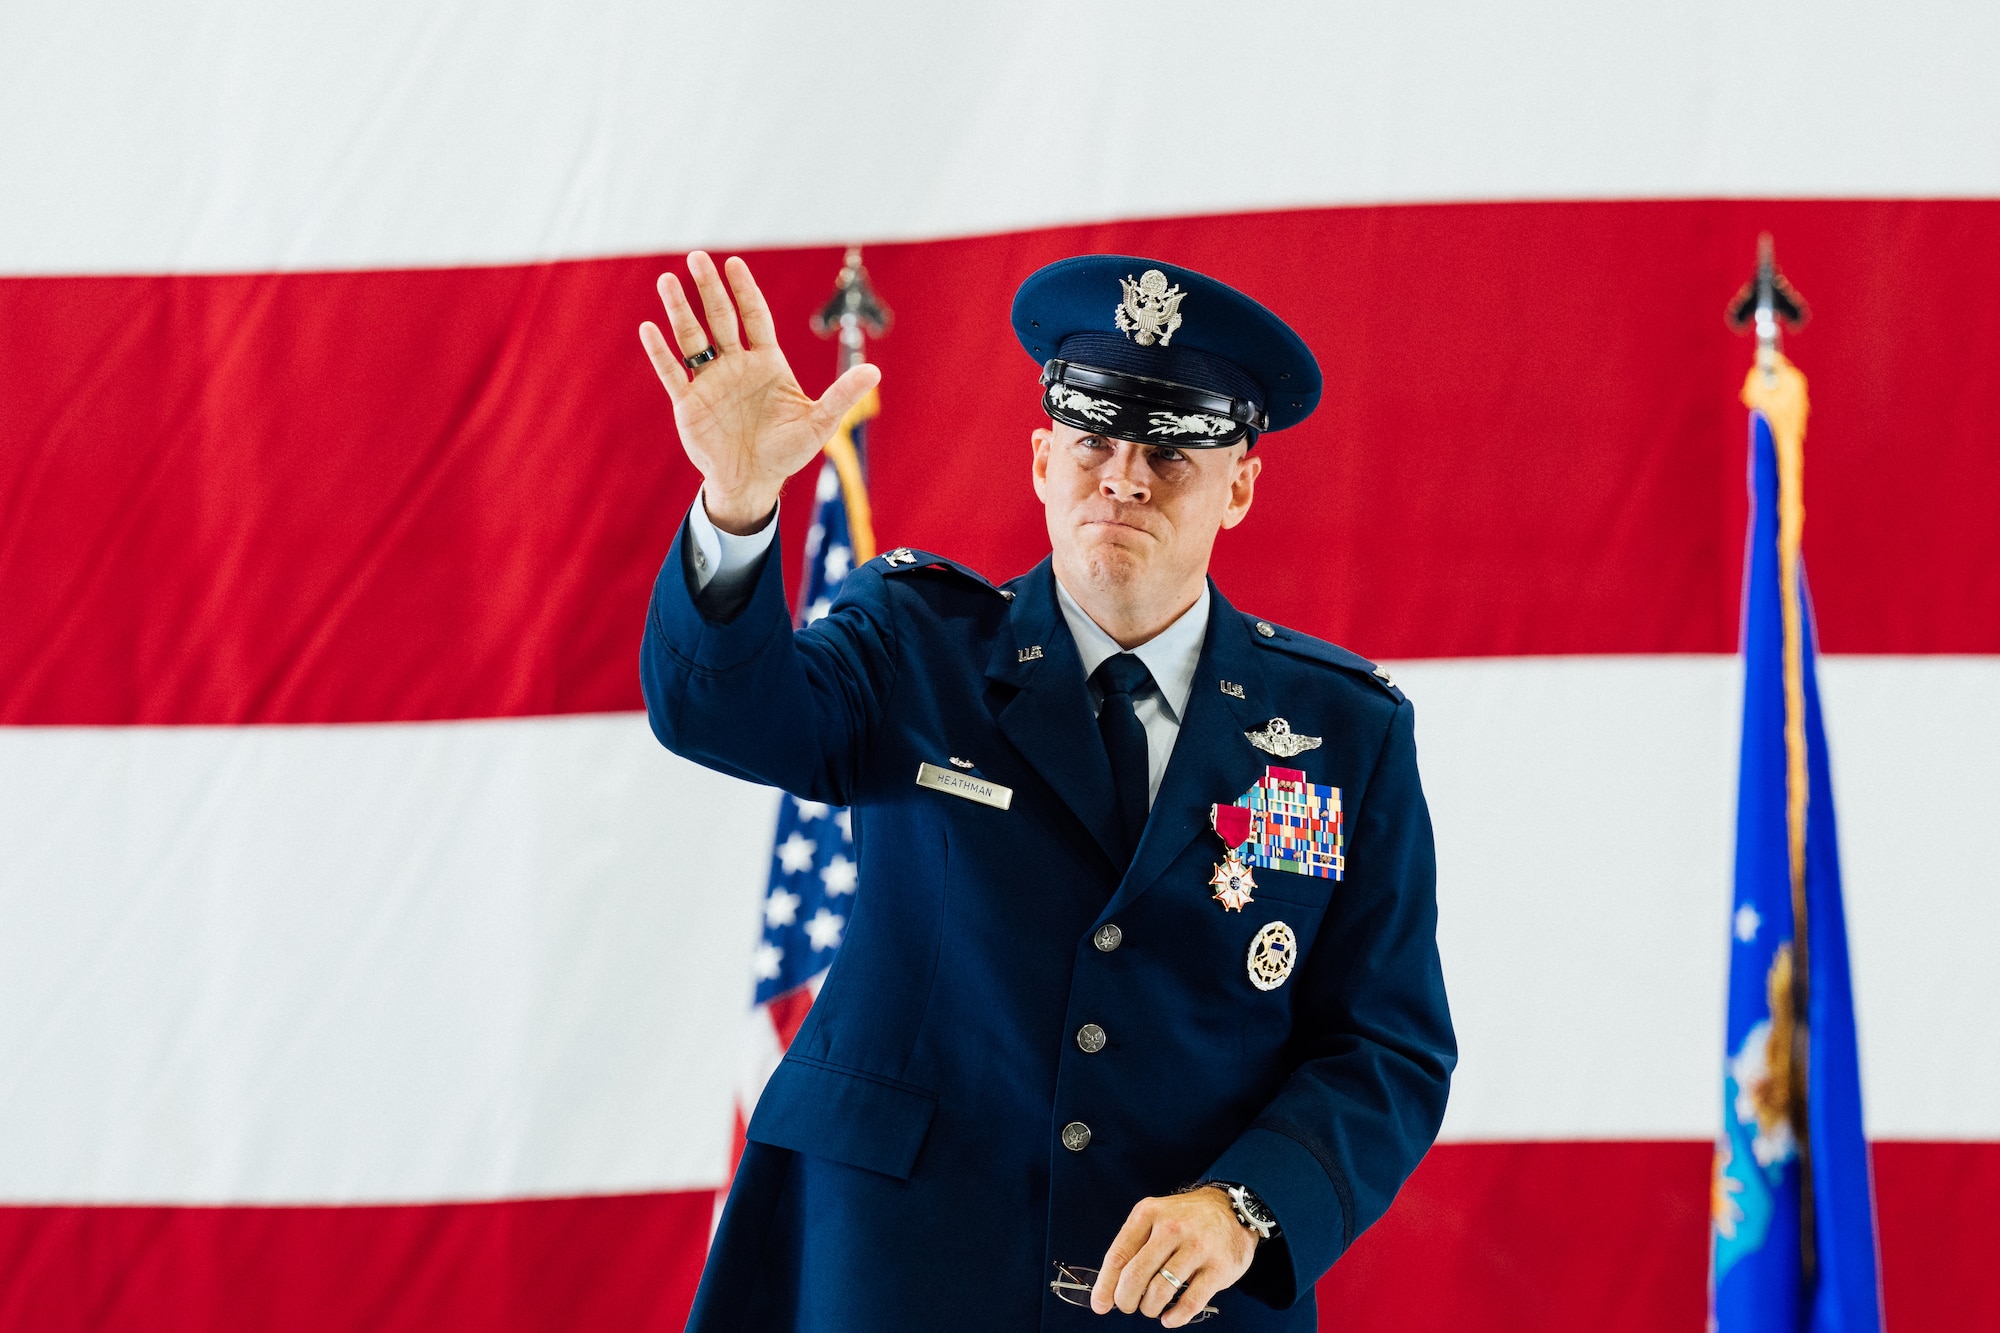 Col. Scot Heathman, outgoing 375th Air Mobility Wing commander, waves goodbye to the men and women of Team Scott after relinquishing command and completing his two-year tour as the leader of the 375th AMW on Scott Air Force Base, Illinois, July 1, 2021. Heathman will assume the role as vice commander of the 18th Air Force after departing the 375th AMW. (U.S. Air Force photo by Tech. Sgt. Jordan Castelan)